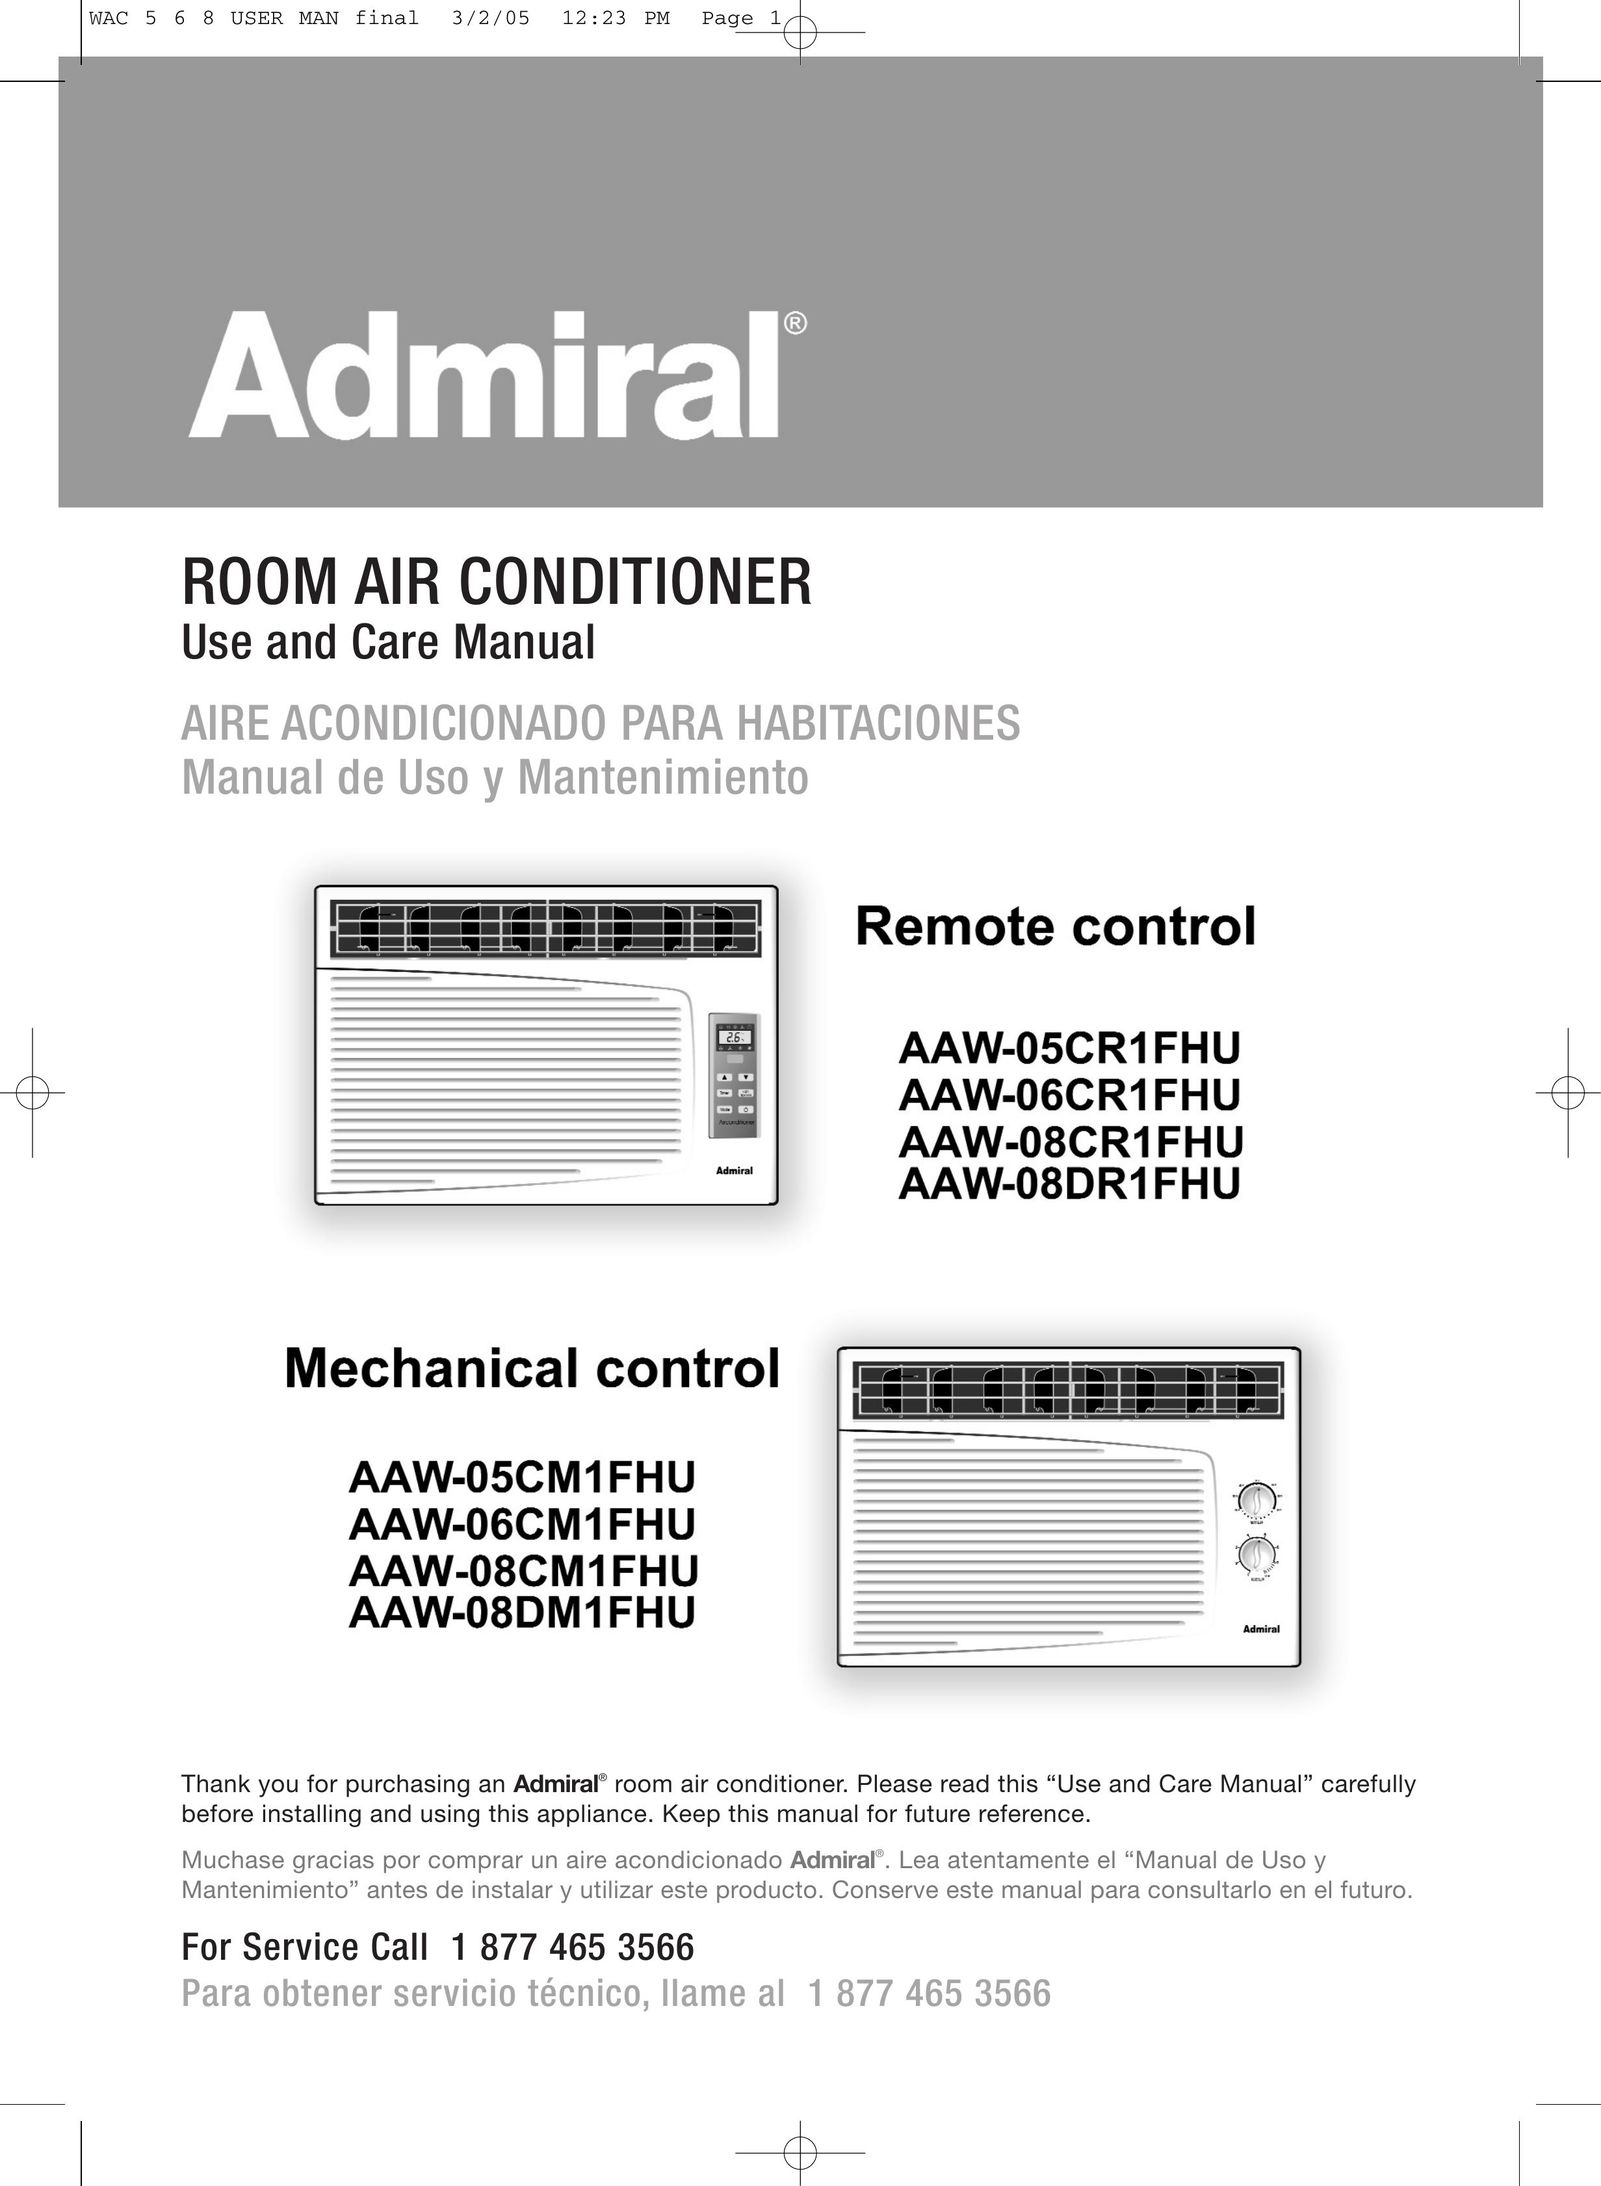 Admiral AAW-08CR1FHU Air Conditioner User Manual